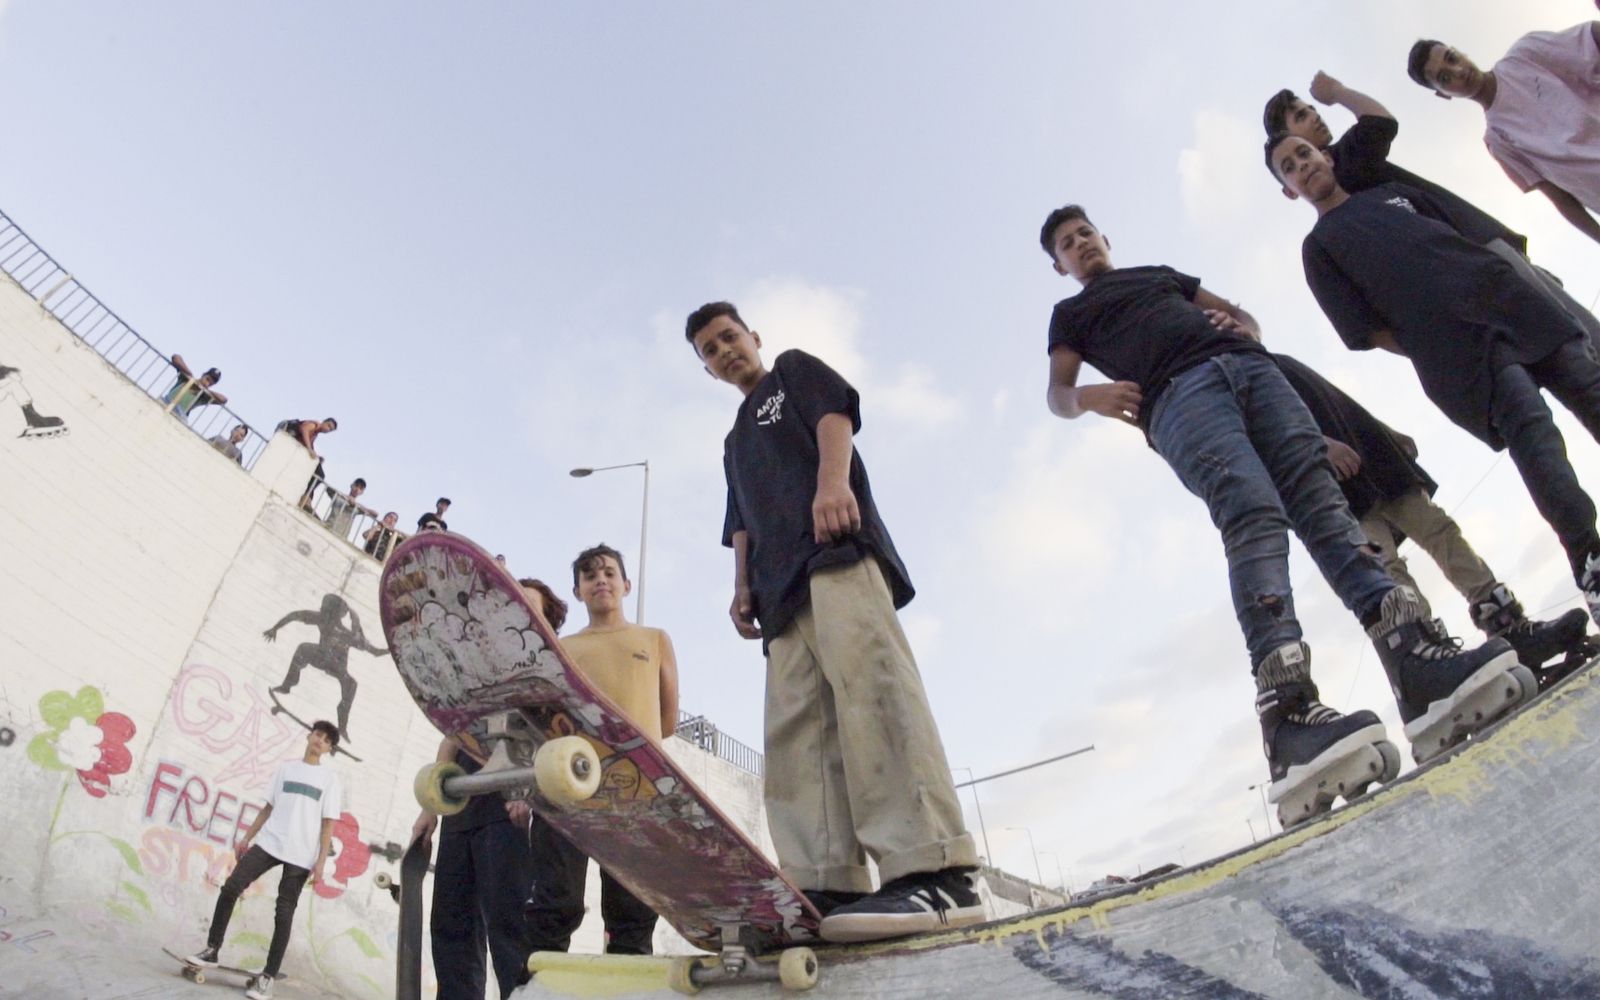 ANTI-DO-TO supported Gaza freestyle in completing its skatepark in Gaza After the launch of a capsule collection to finance it 